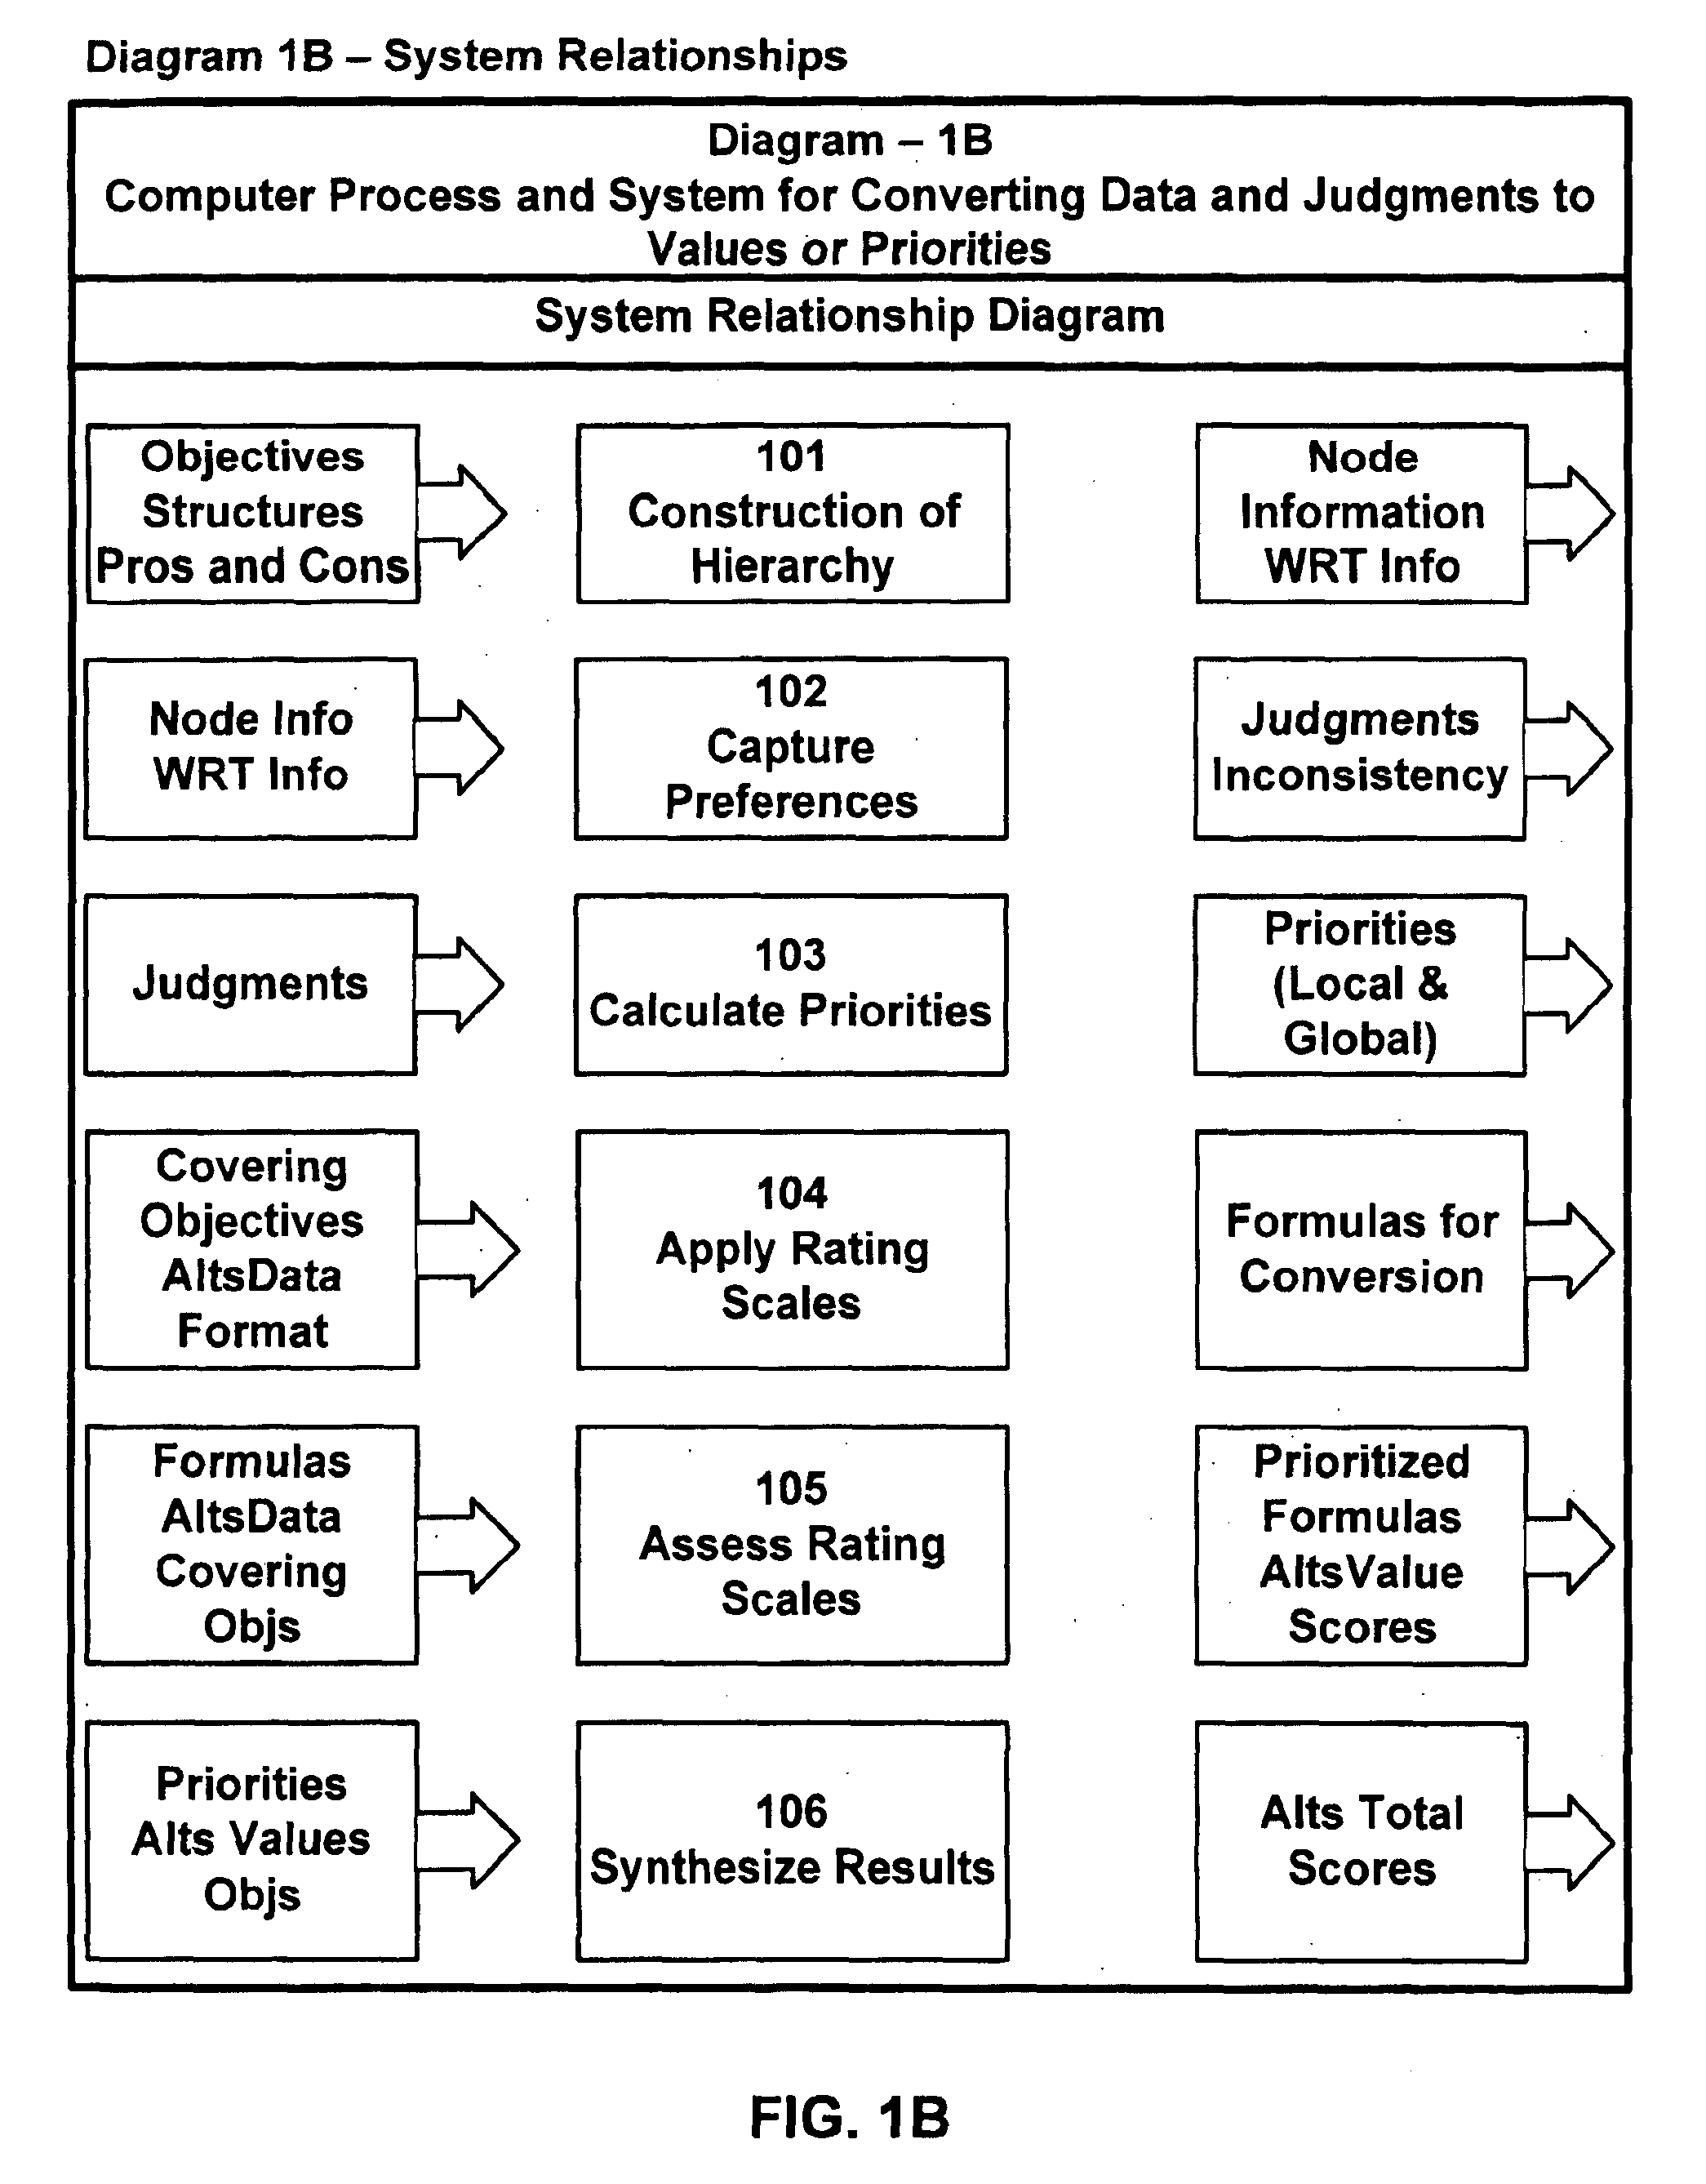 Method and system of converting data and judgements to values or priorities